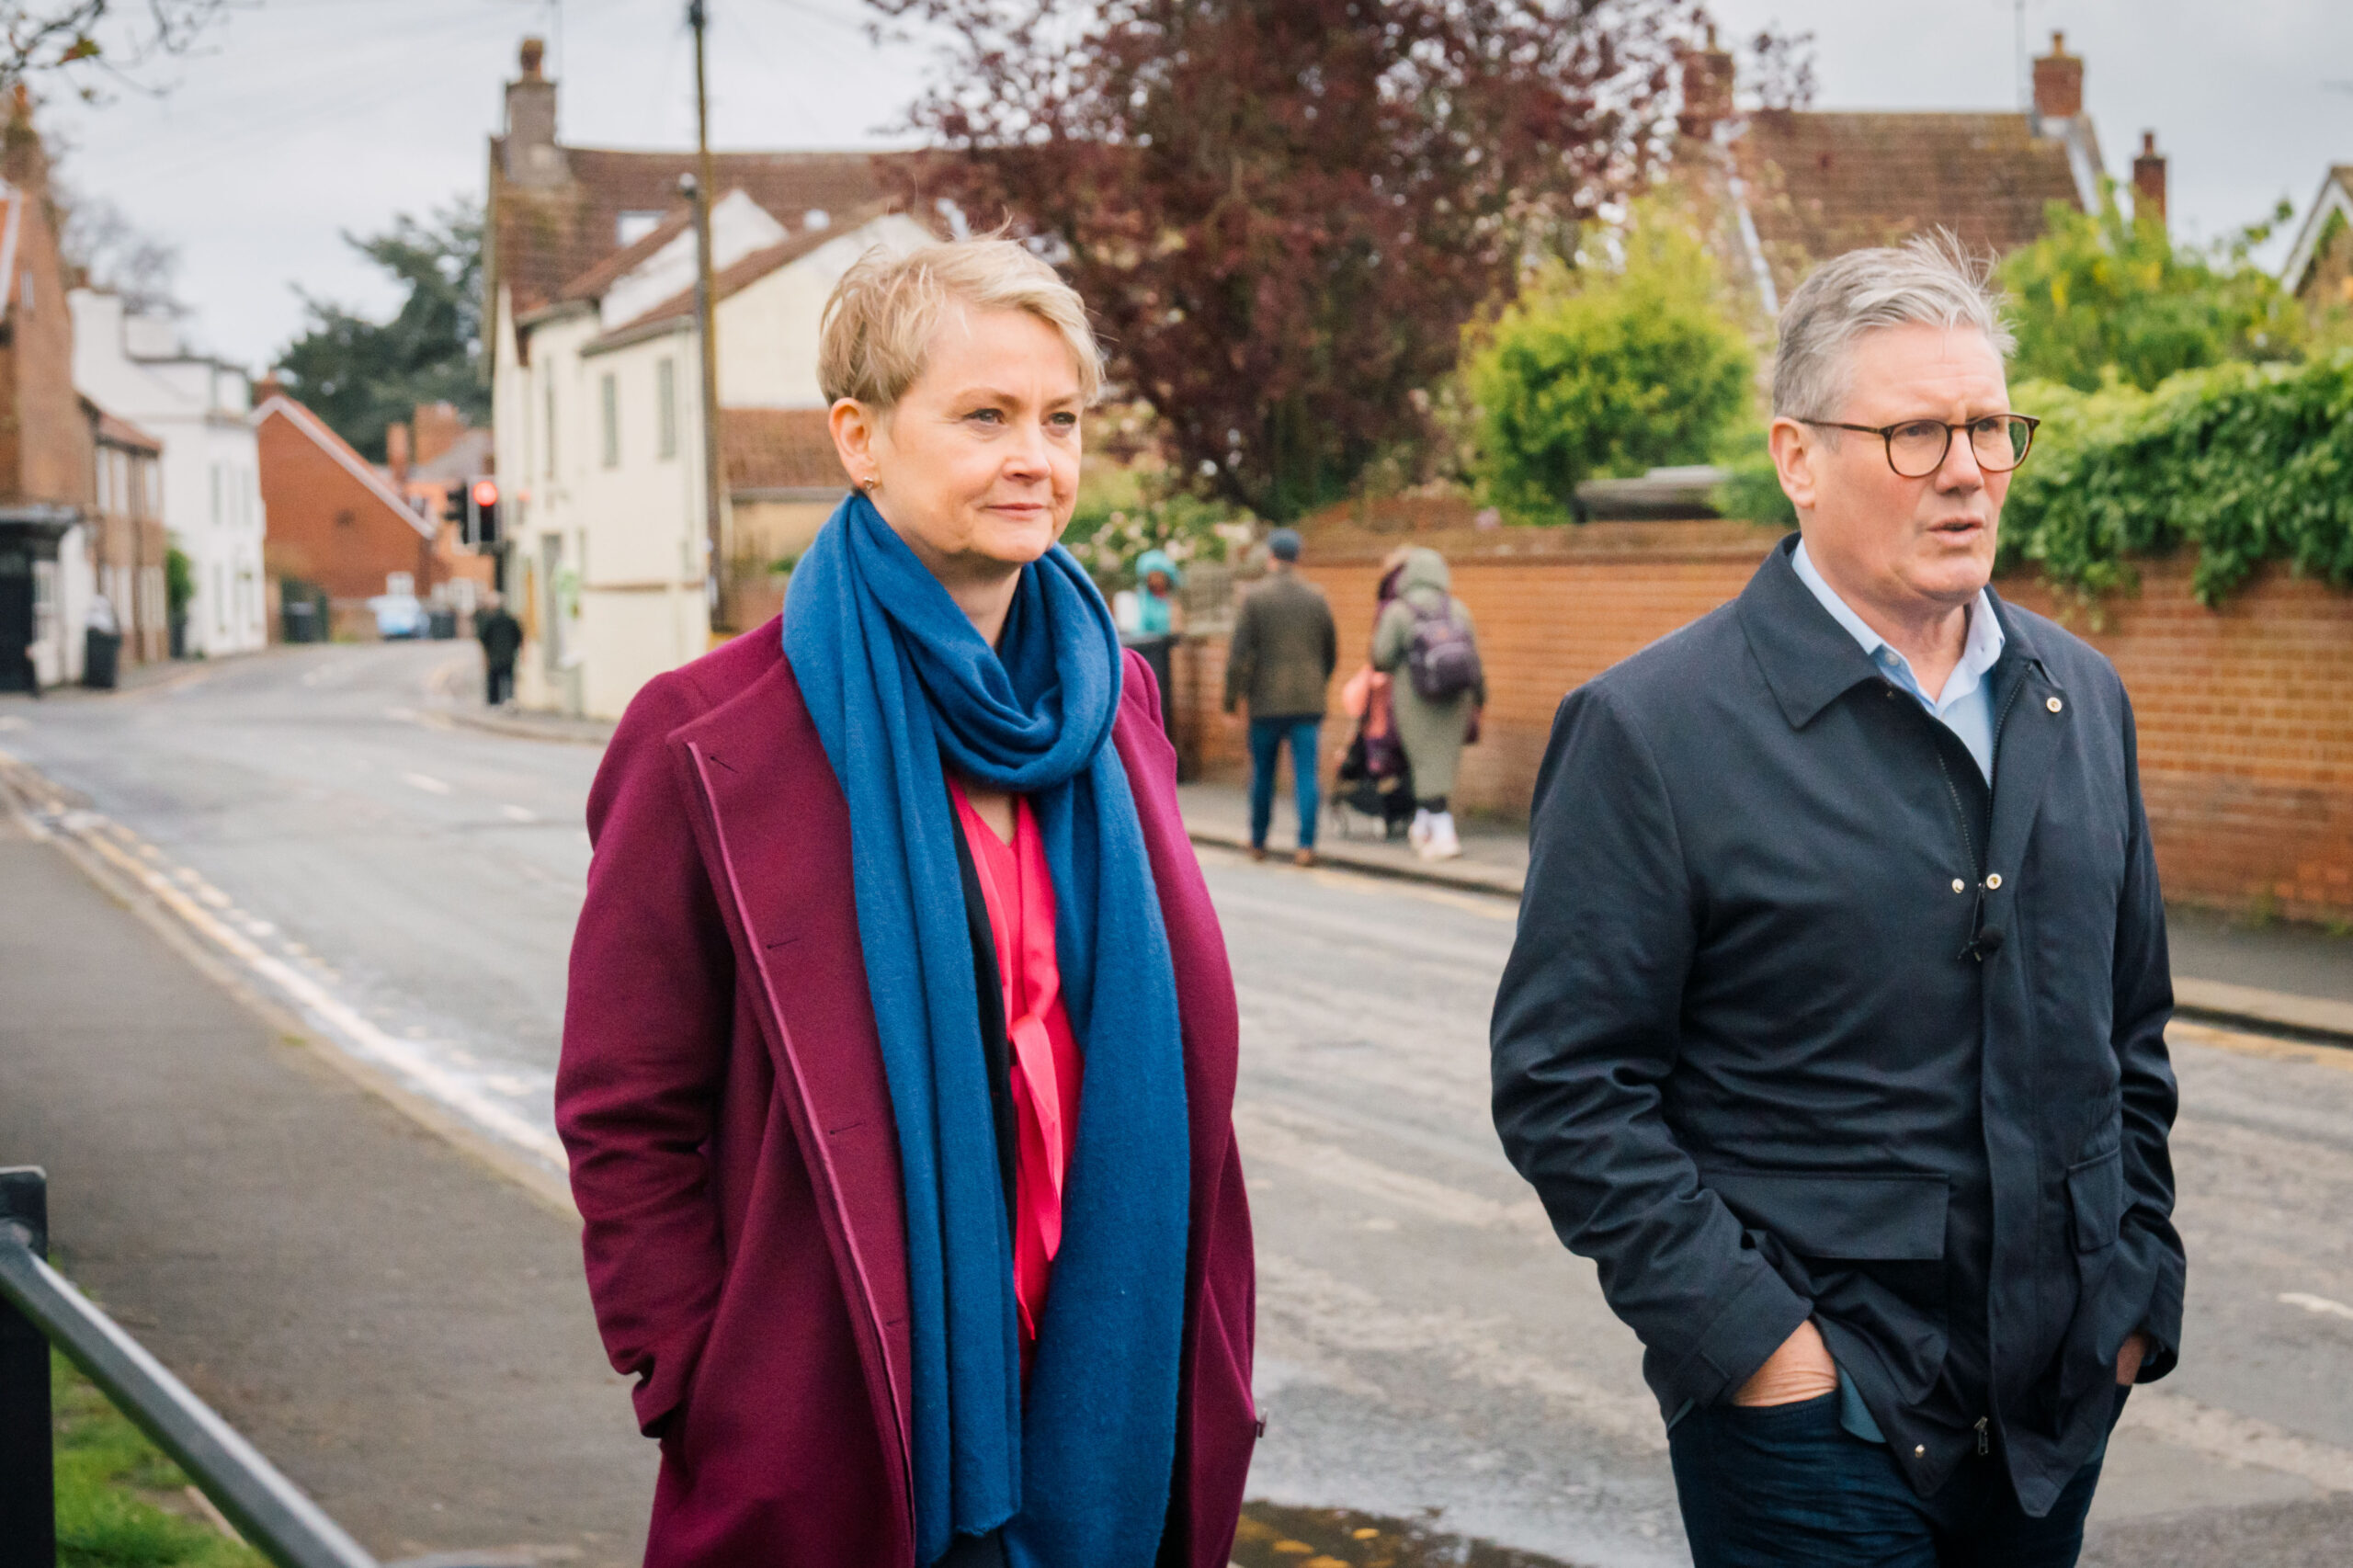 Keir Starmer and Yvette Cooper walking together down a street